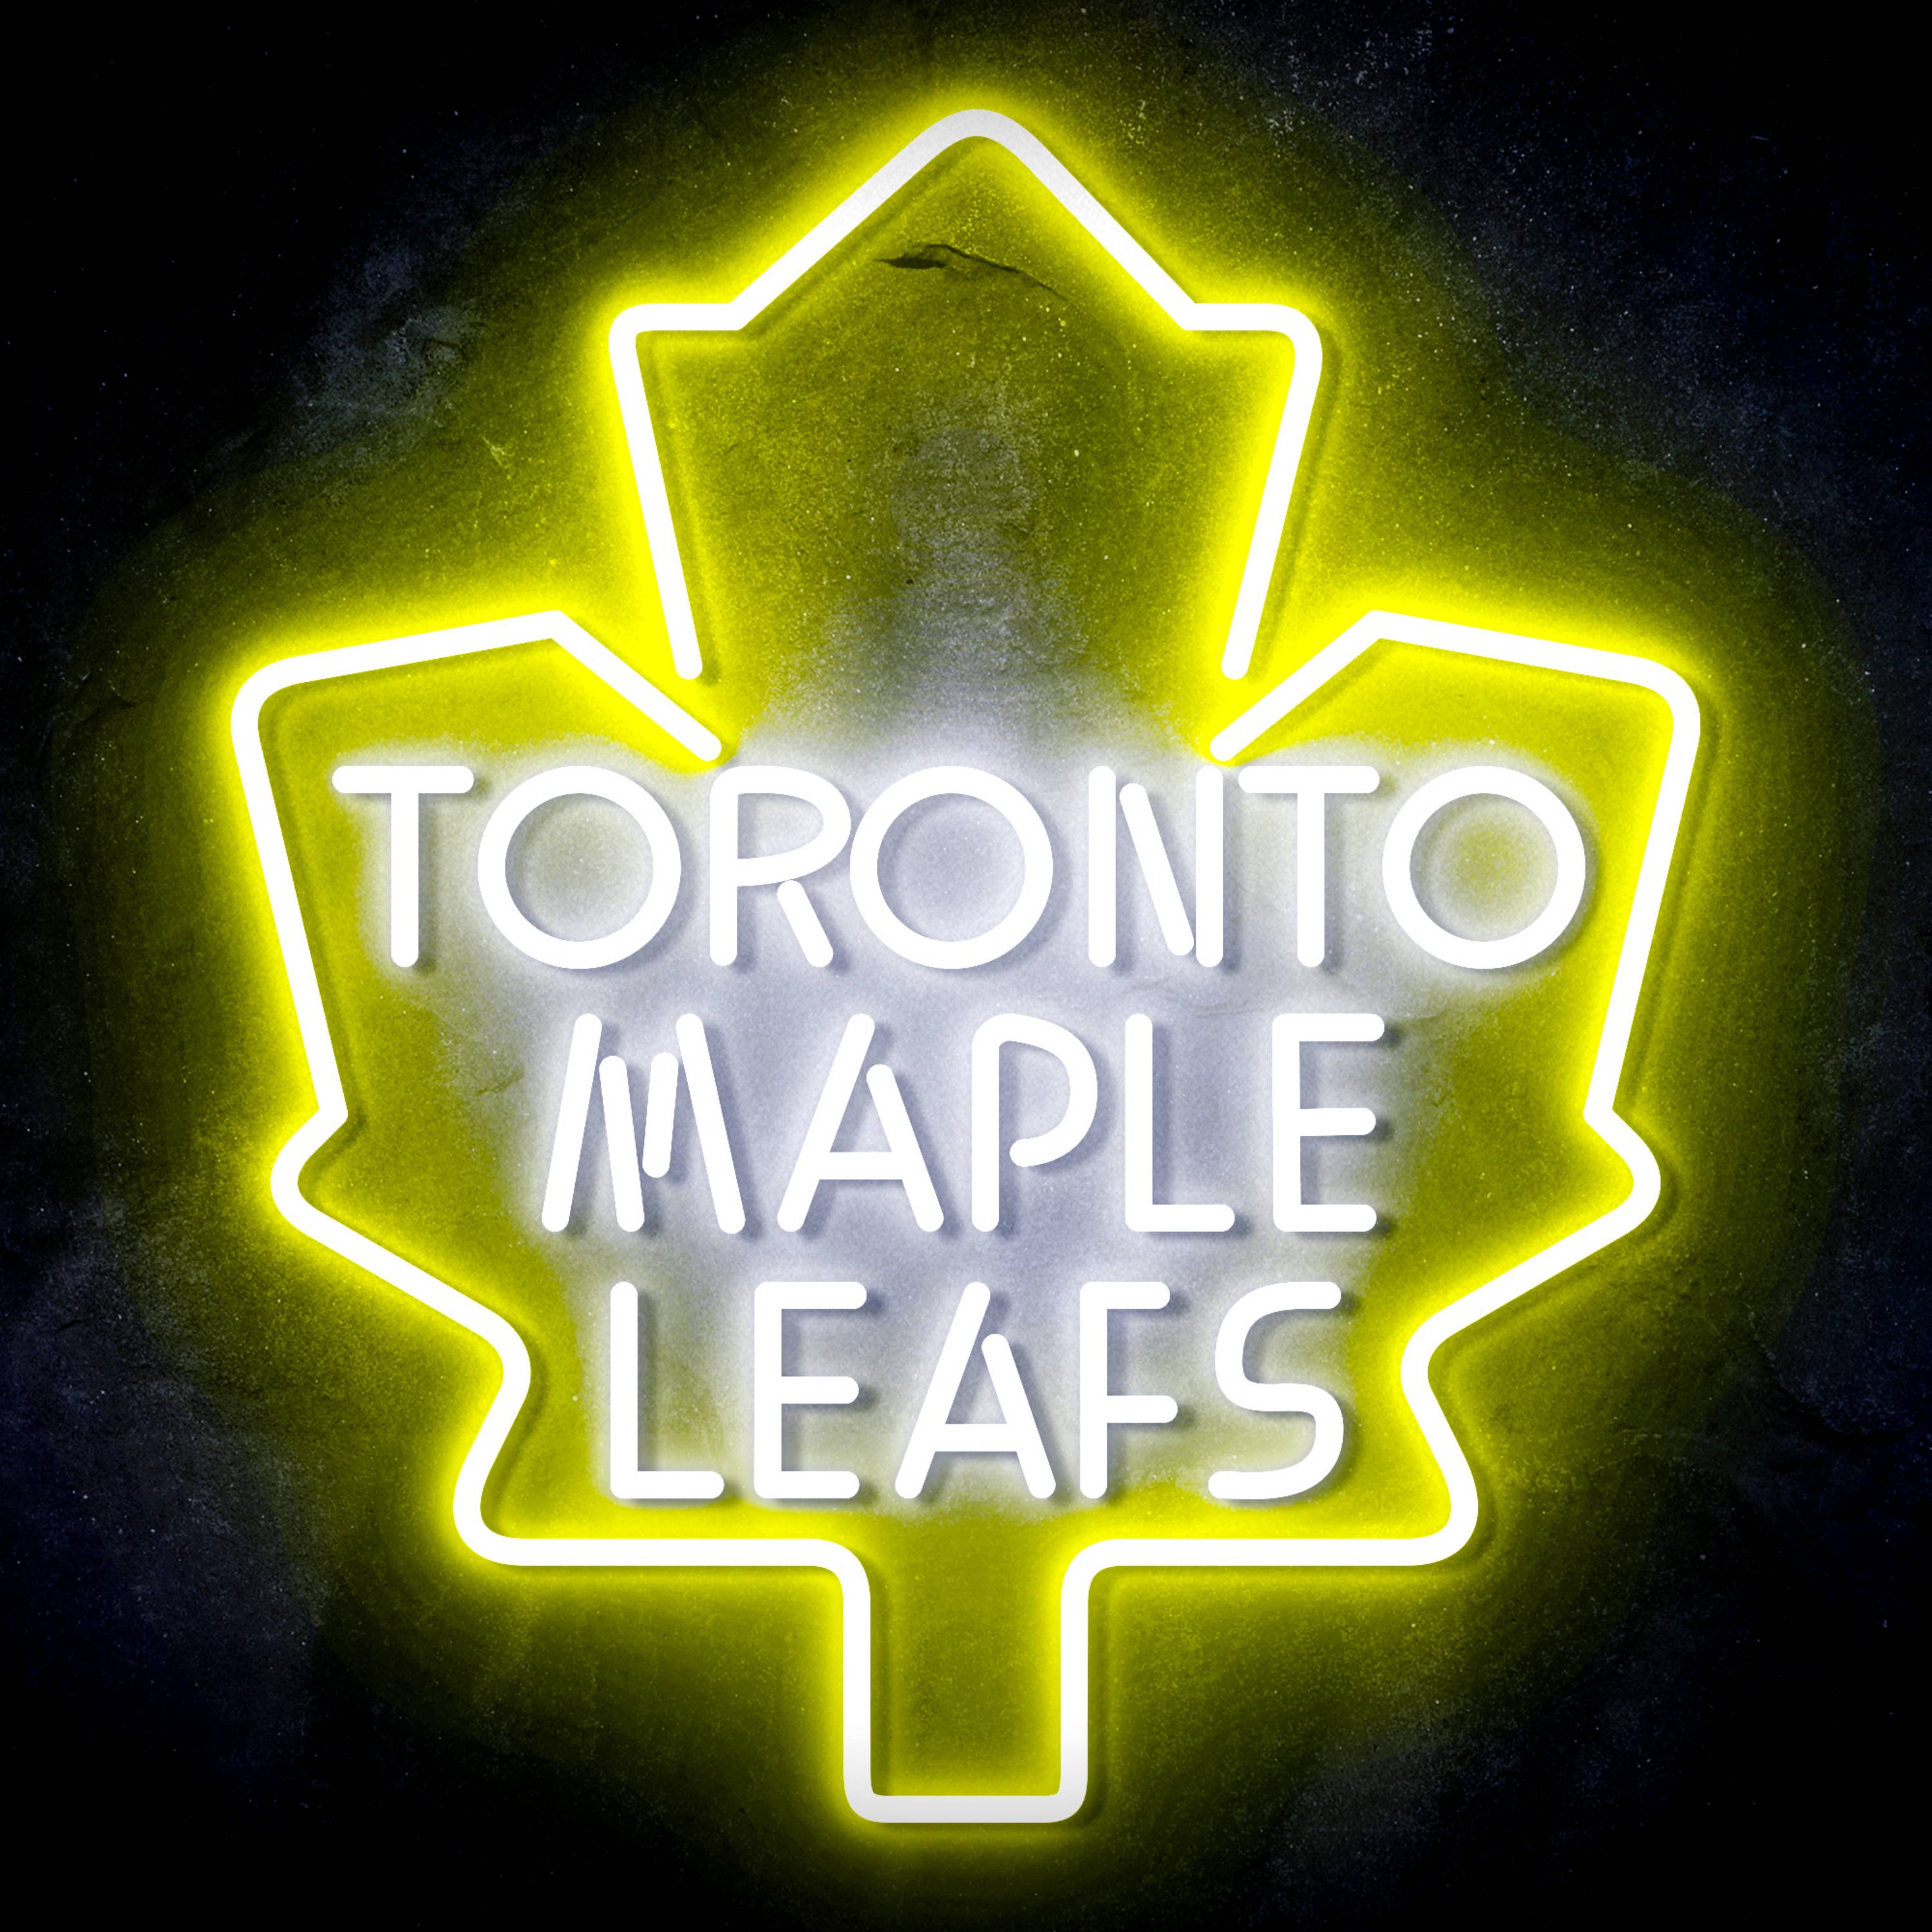 NHL Toronto Maple Leafs LED Neon Sign